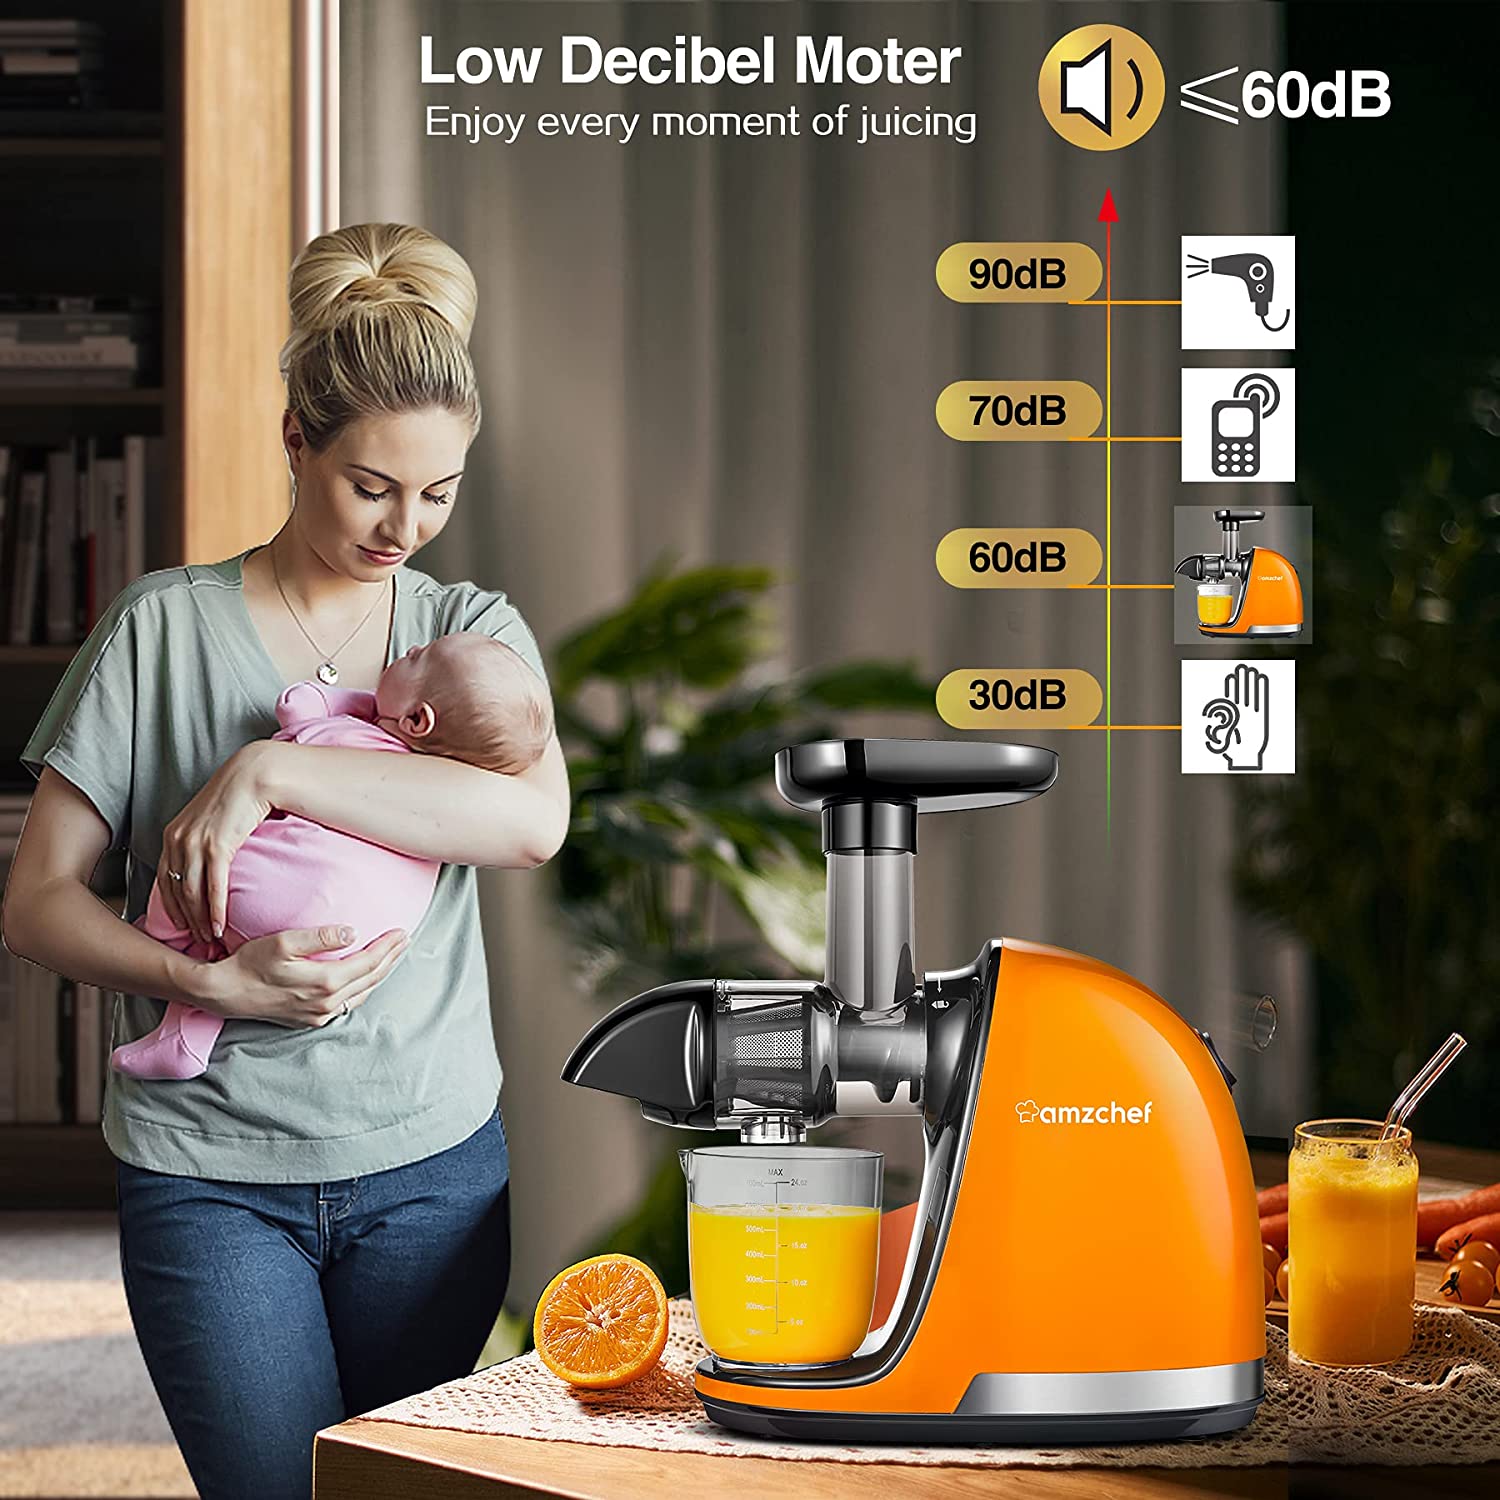 https://iamzchef.com/cdn/shop/products/amzchefColdPressJuicer_SlowMasticatingJuicerMachineswithReverseFunctionAnti-Clogging_QuietMotorSlowJuicerExtractorwithBrush_FruitJuicerwithPlasticWrench_forHighNutrientFruit_Vegetable_a80eb550-5b2d-48f7-aa92-fa3c99f5b246.jpg?v=1648275975